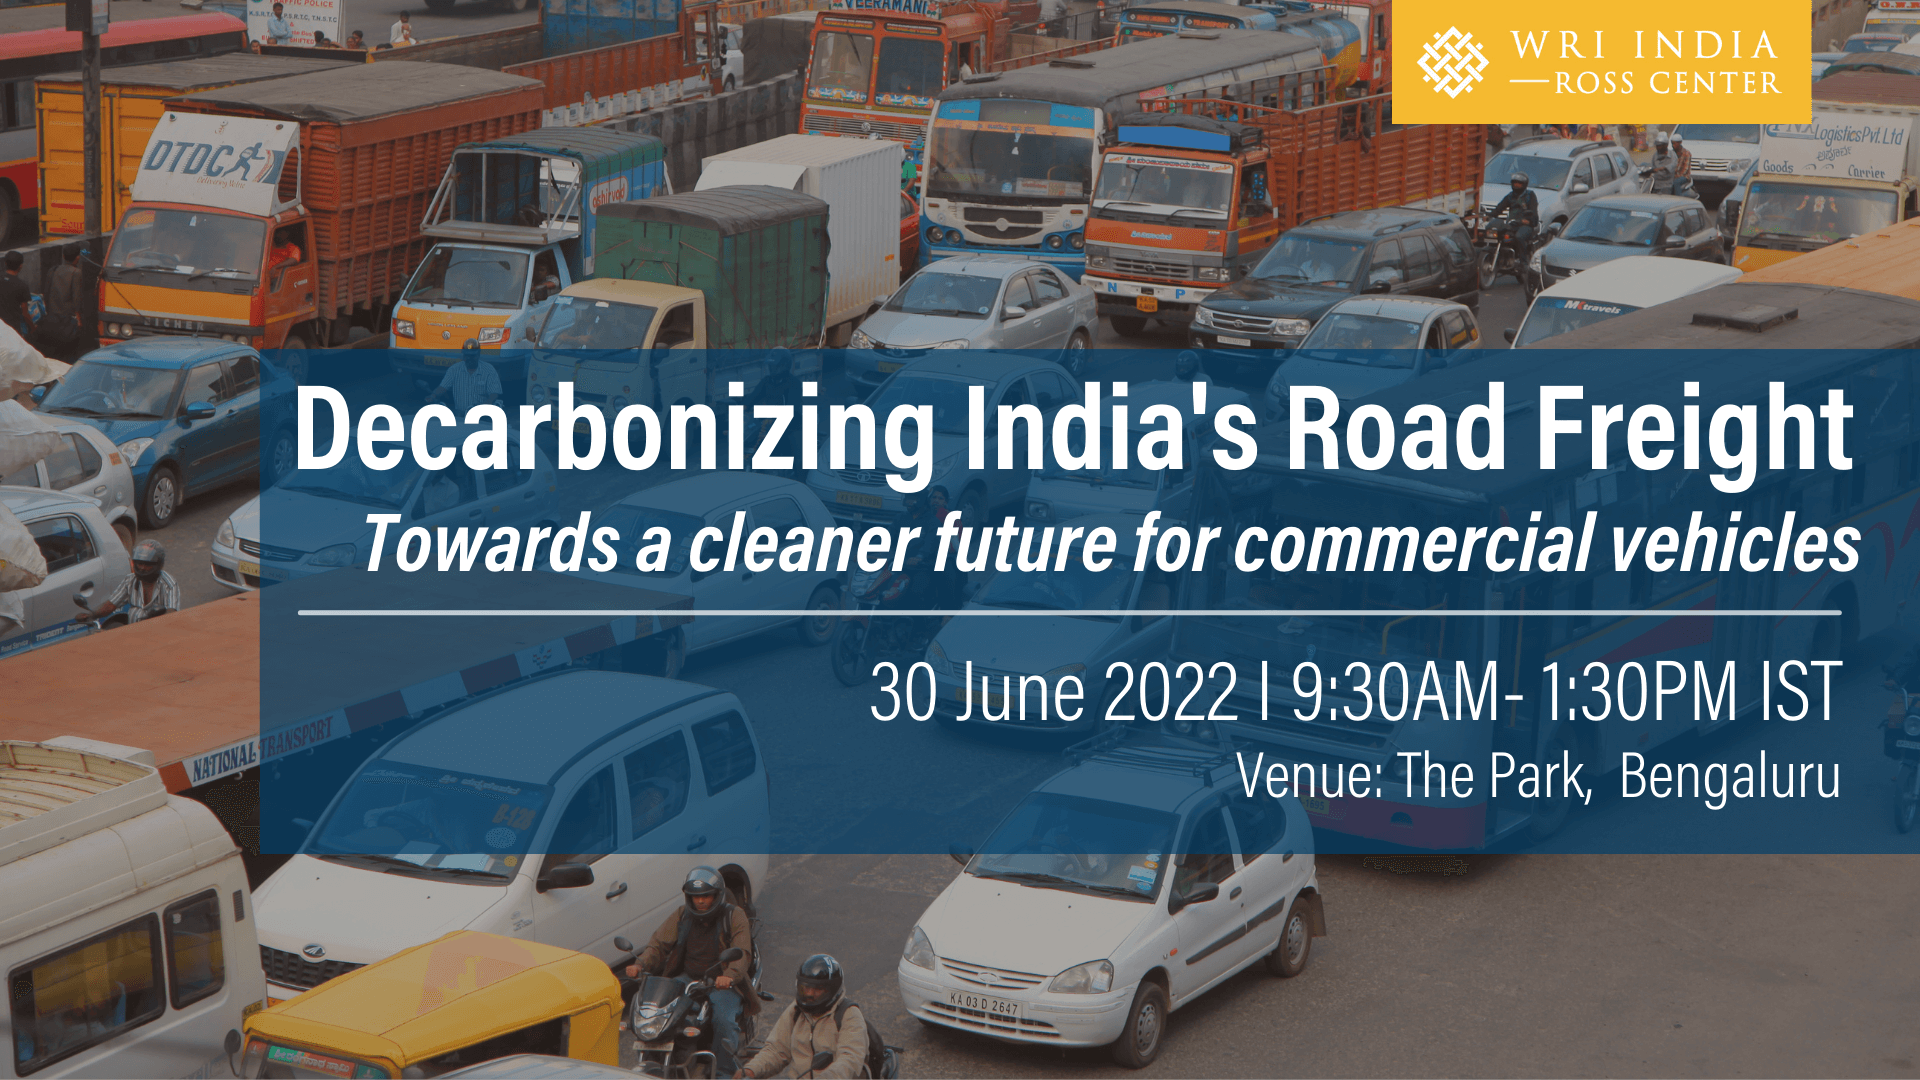 Decarbonizing-India-Road-Freight-Towards-Cleaner-Greener-Electric-Future-Commercial-Vehicles.png